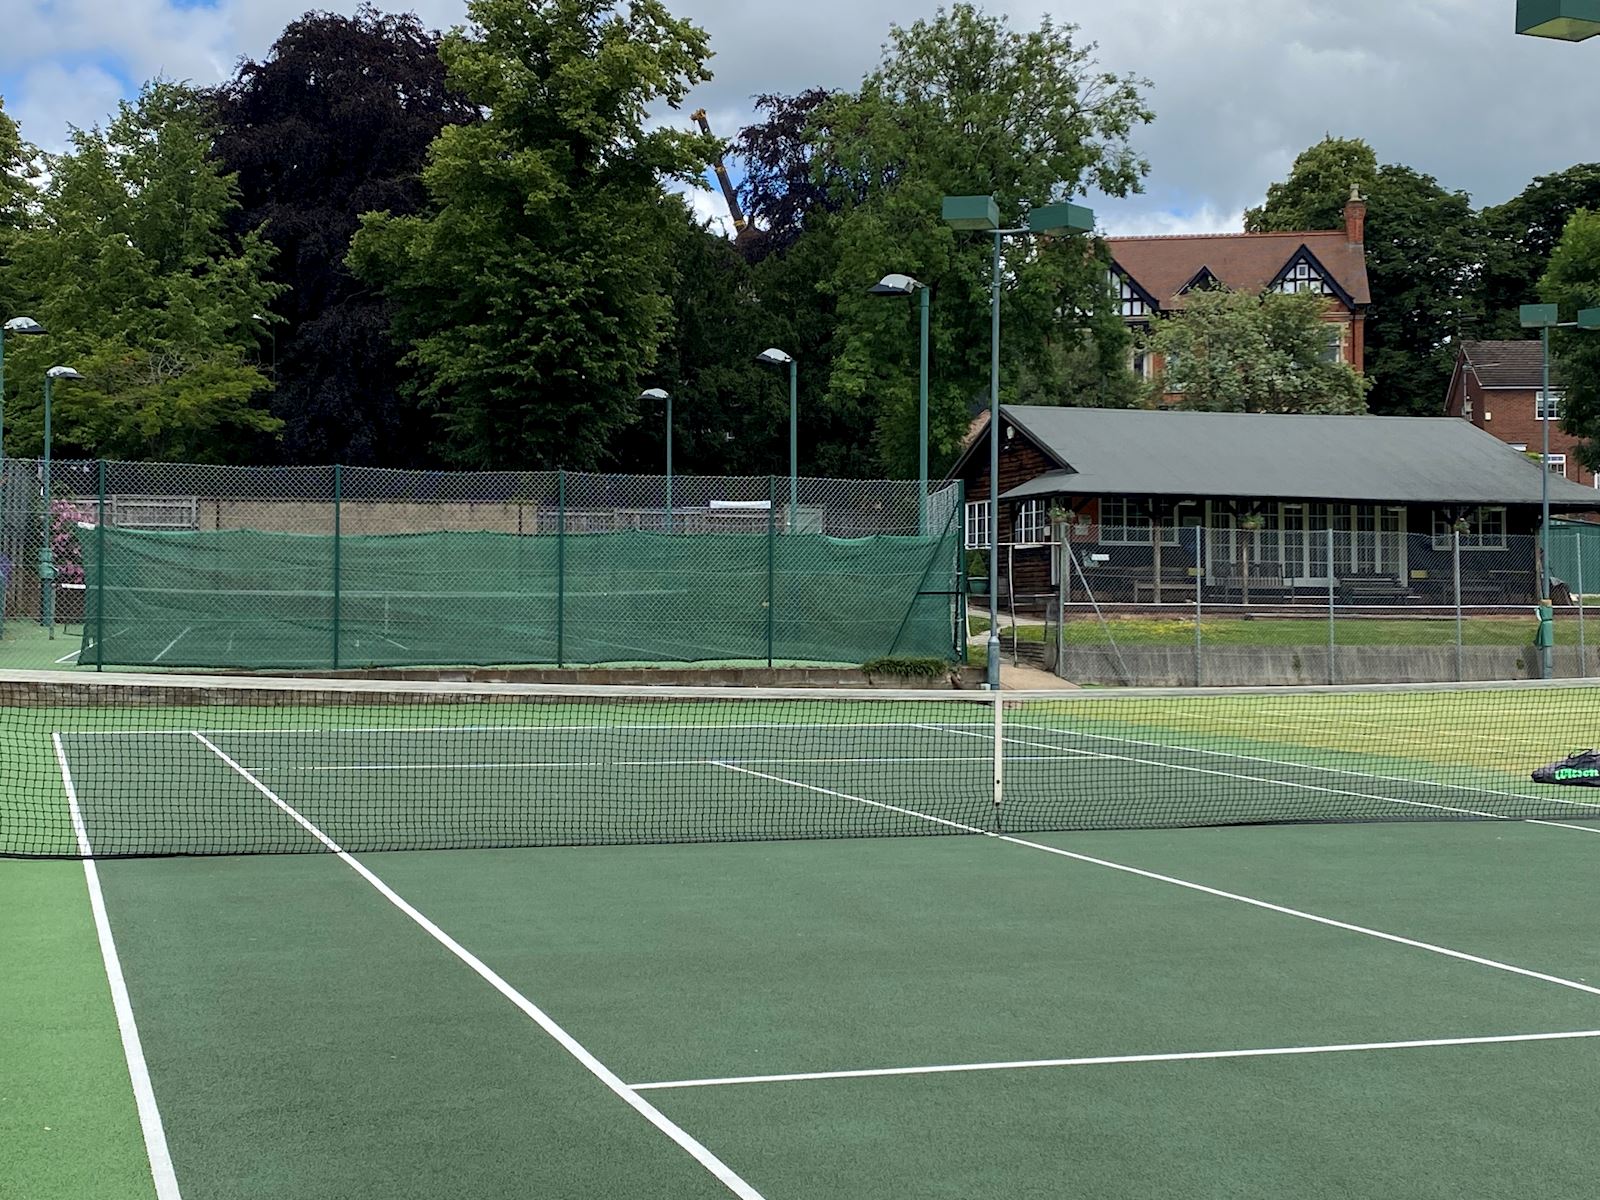 Court 5 with clubhouse in the background